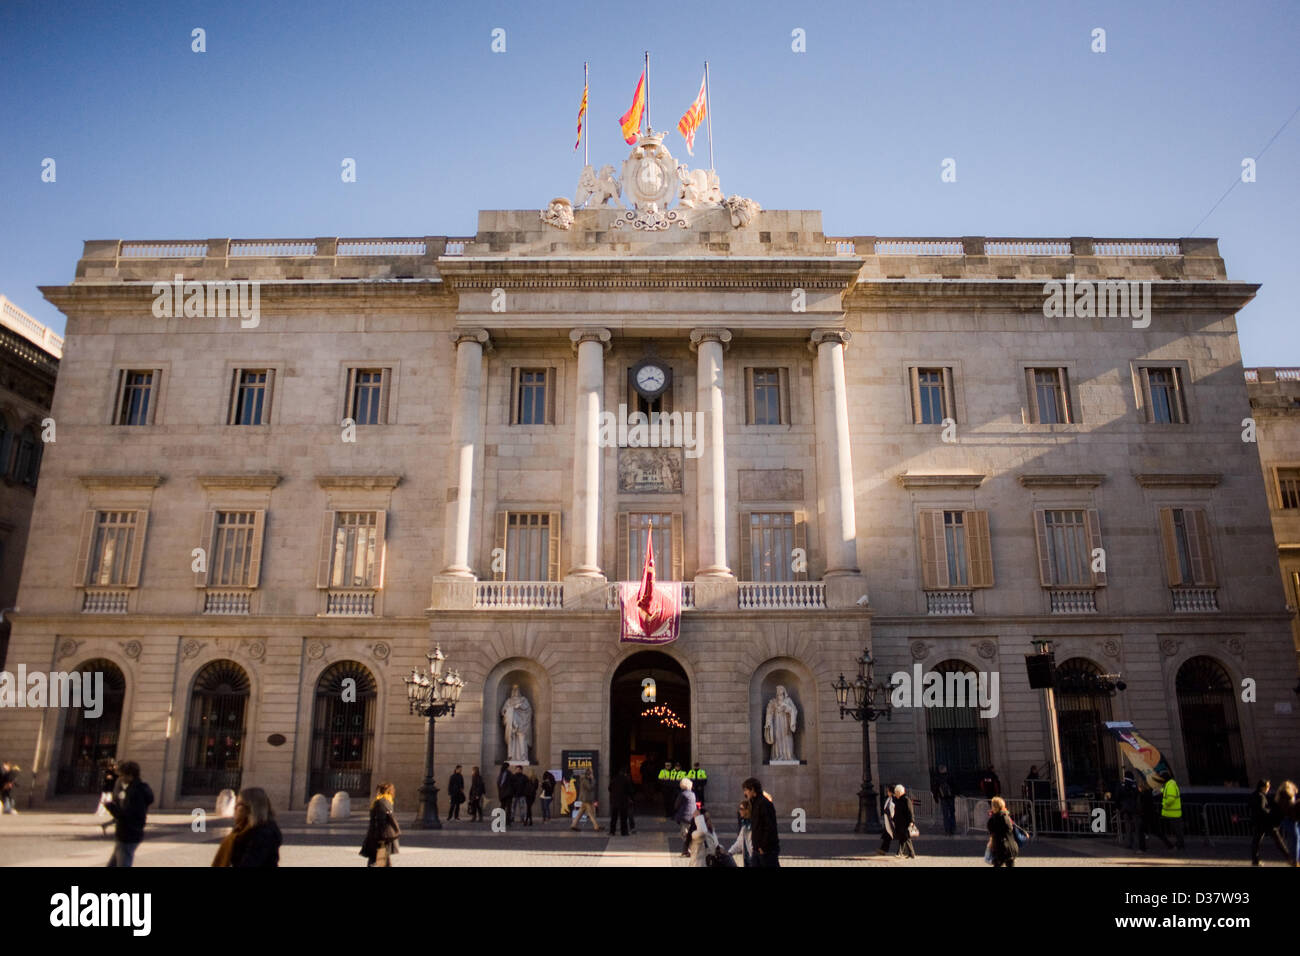 12 February , 2013-Barcelona, Spain. Neoclassical facade of the City of Barcelona.  La Casa de la Ciutat (in Catalan city house) is the building that houses the offices of the City of Barcelona. It has more than 6 centuries of history and architectural presence ranging from the Gothic to Neoclassical. Government offices and meeting rooms coexist with historic artwork in the form of sculptures, tapestries and paintings. These days, on the occasion of the celebration of the festival of Santa Eulalia (patron of the city with Santa Merce) remains open its doors to allow citizens to visit. Stock Photo